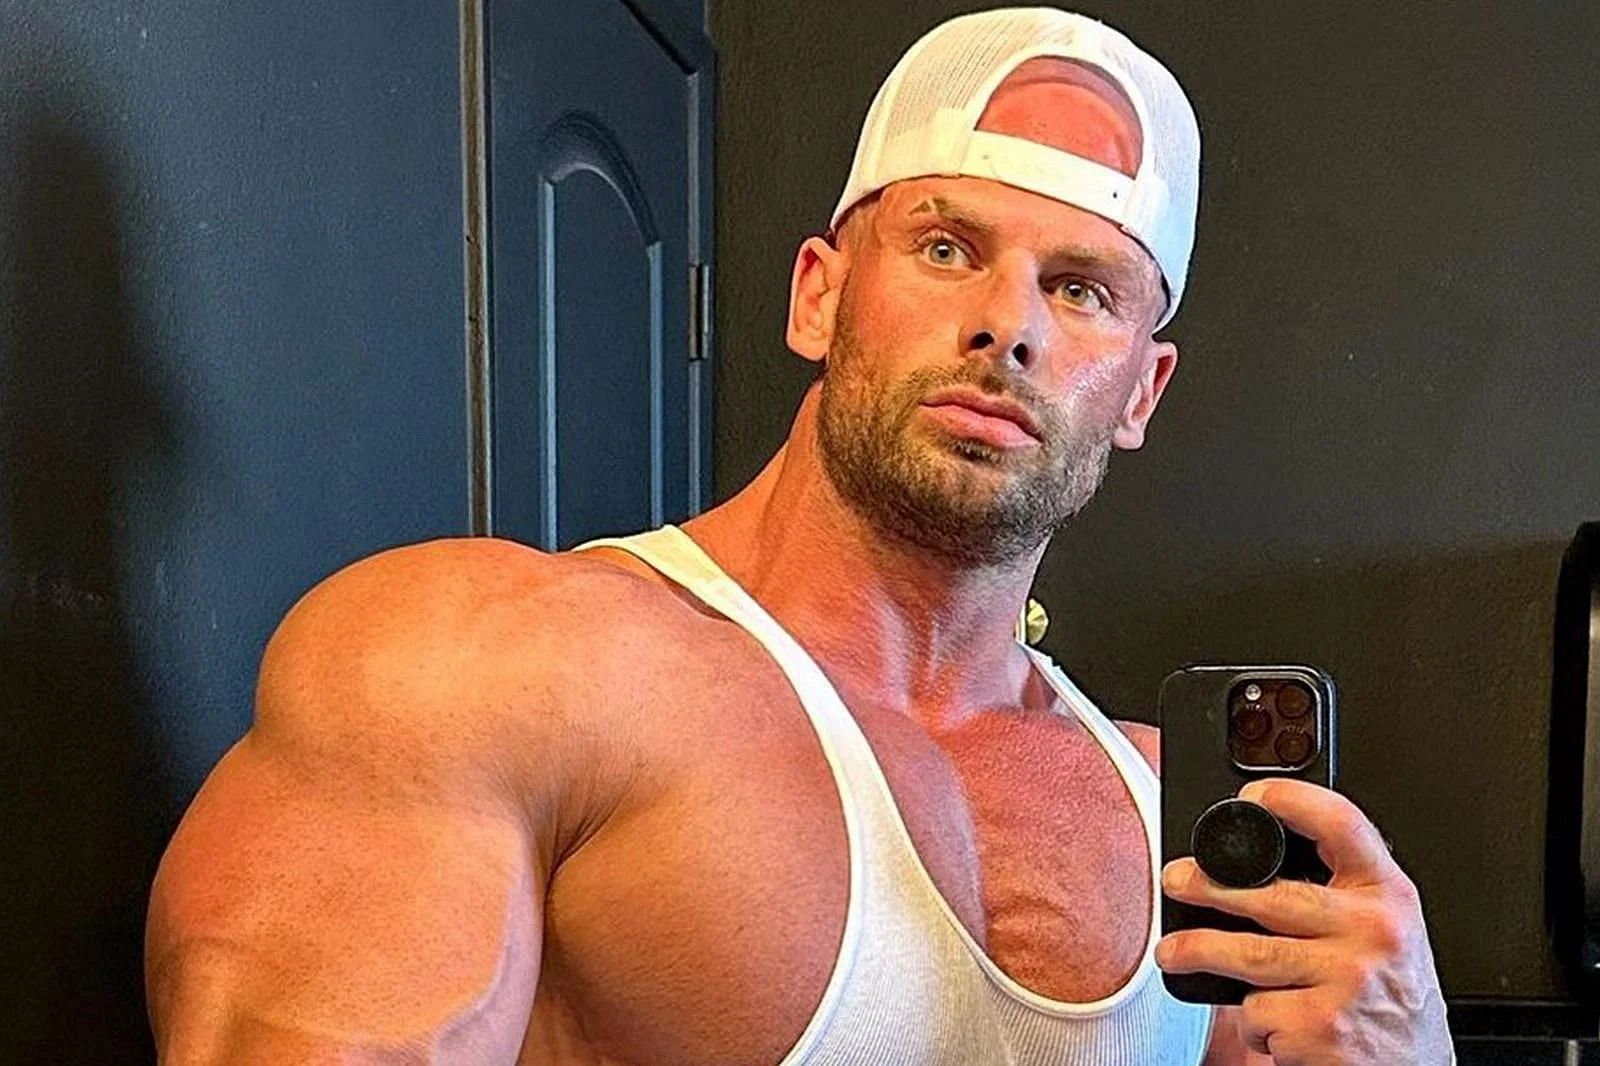 Joey Swoll slams a woman for falsely accusing a man in the gym.